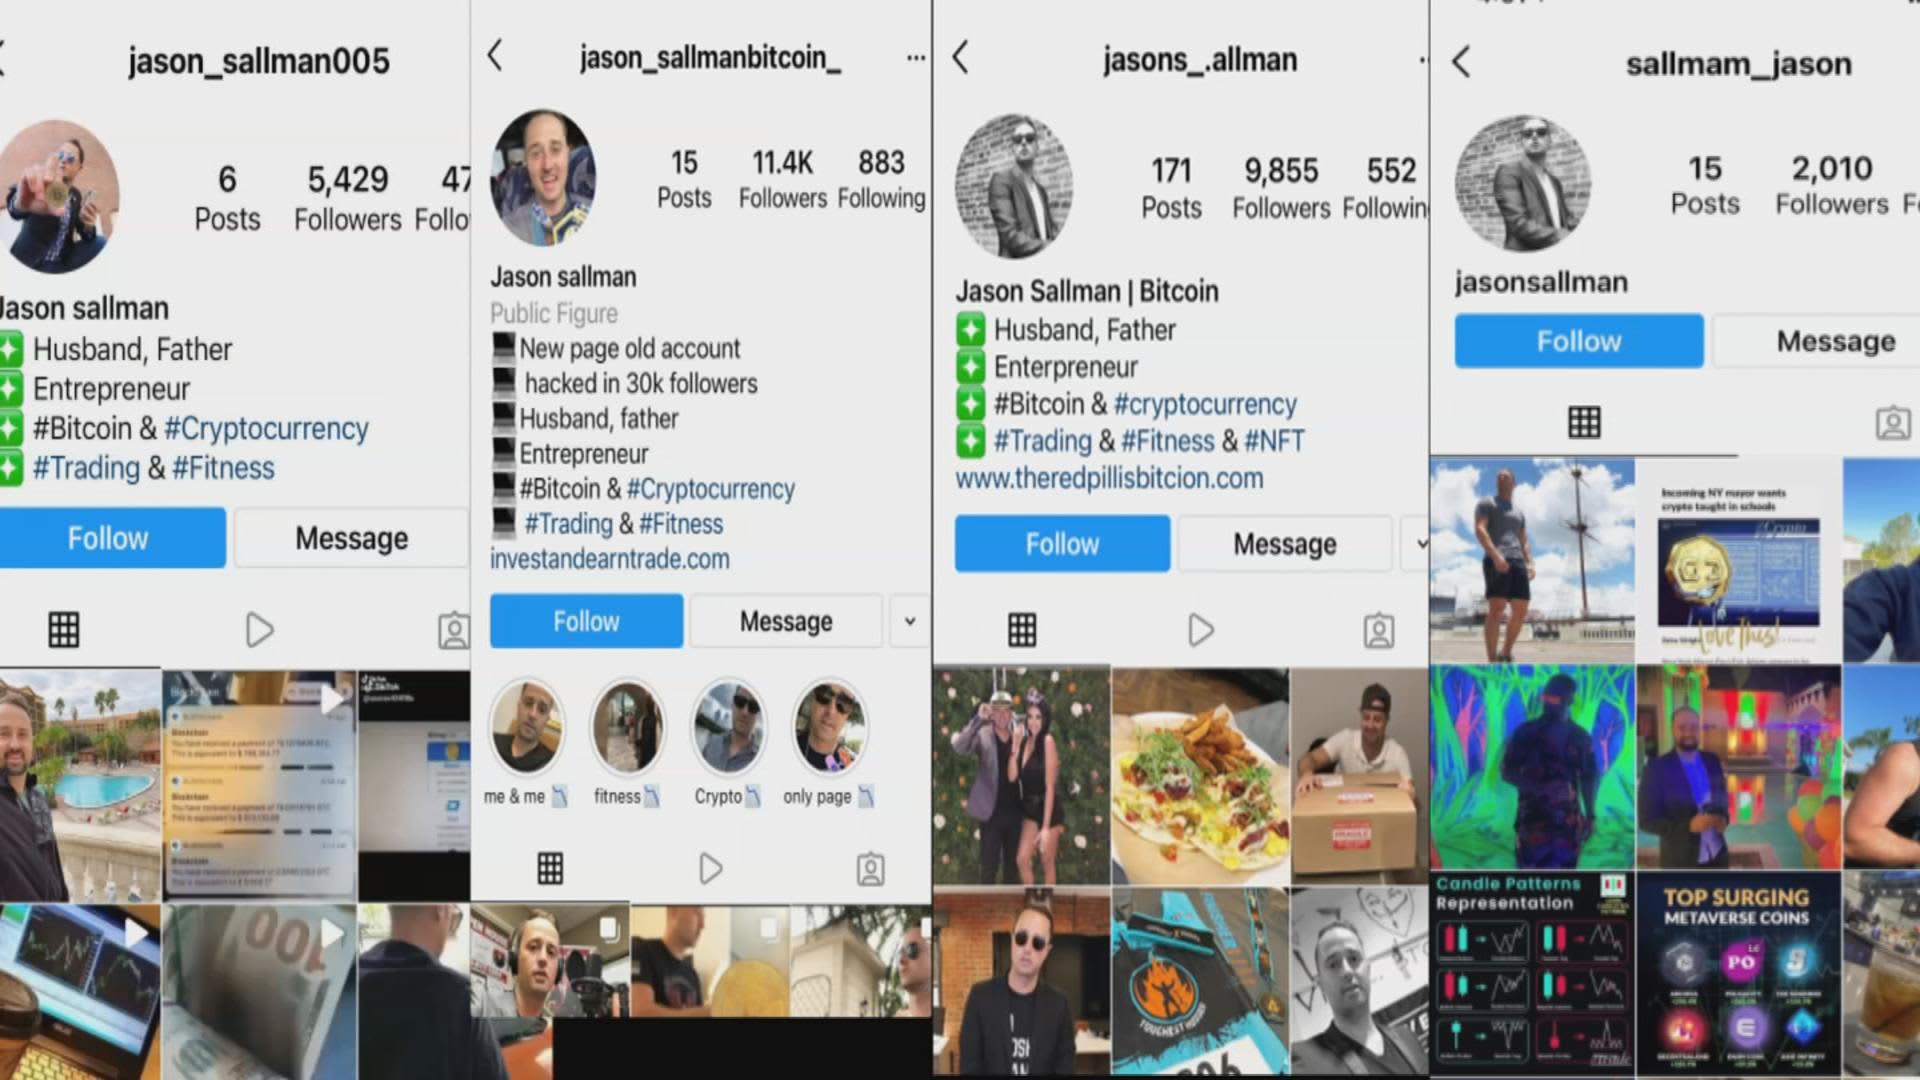 Jason Sallman said scammers are stealing his photos to create accounts that impersonate him on Instagram.